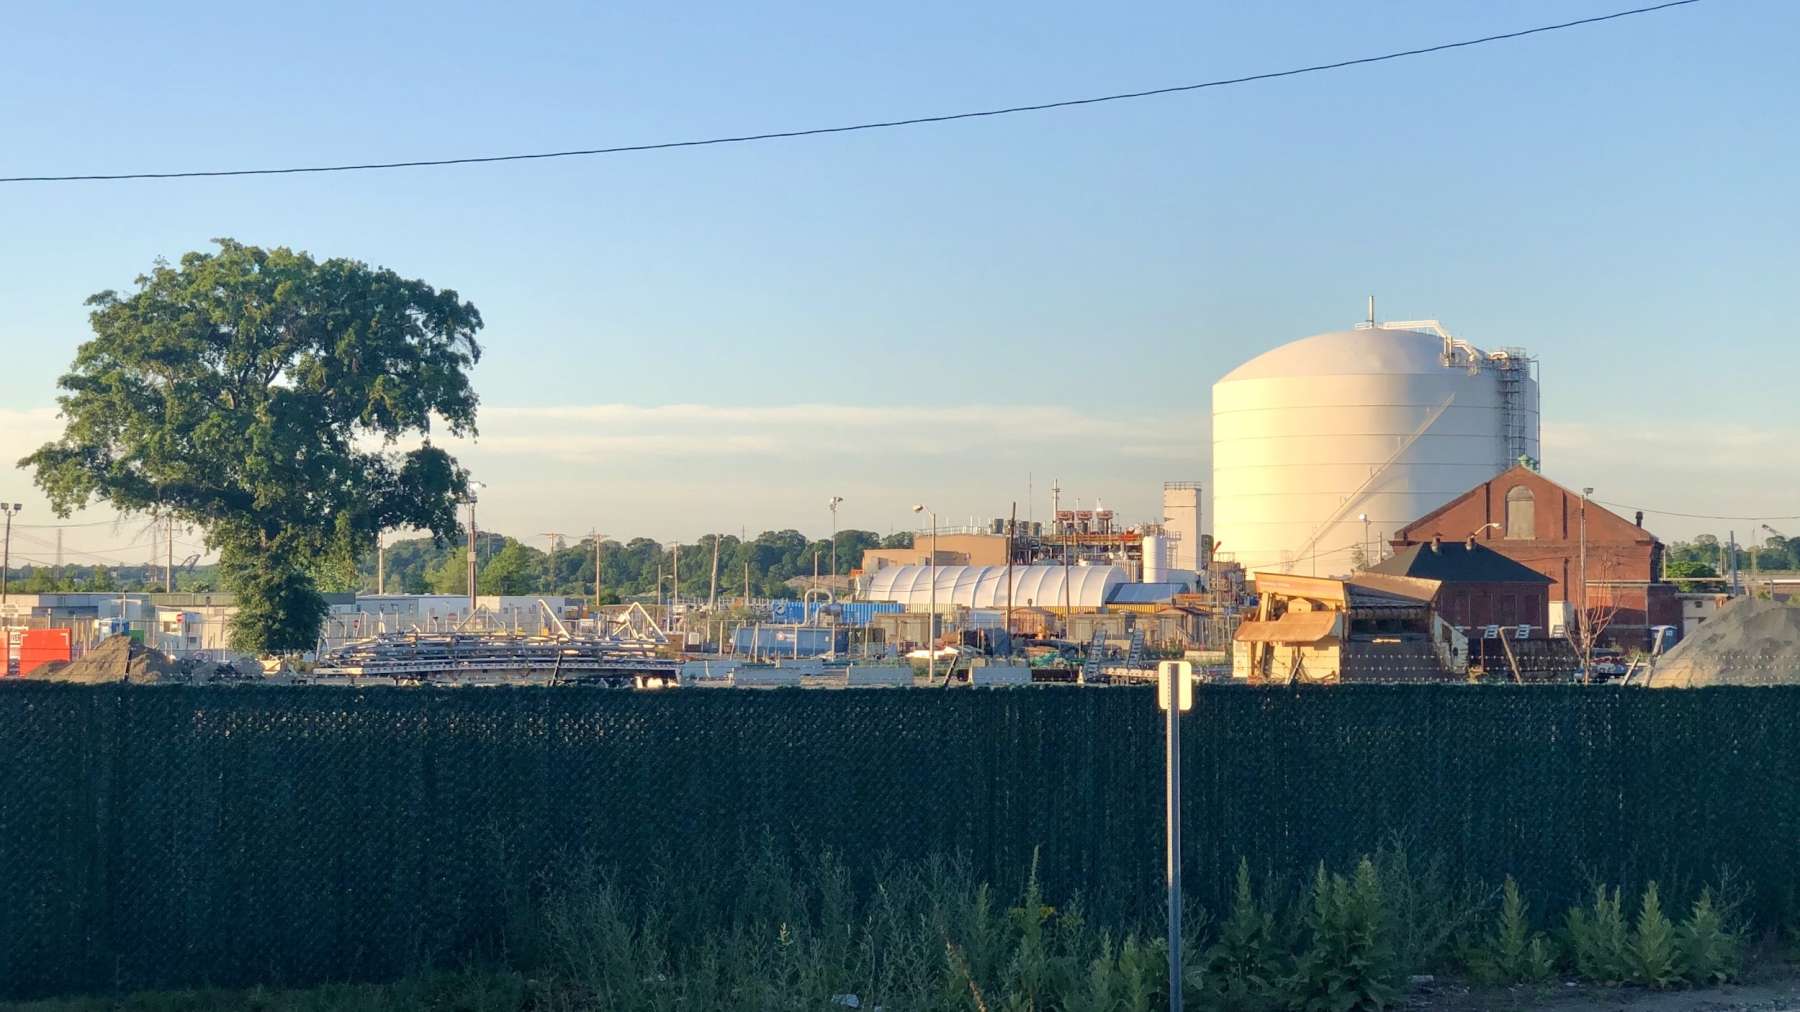 Rhode Island News: PVD City Solicitor and AG Neronha join CLF as intervenors in Sea 3 LPG expansion proceedings